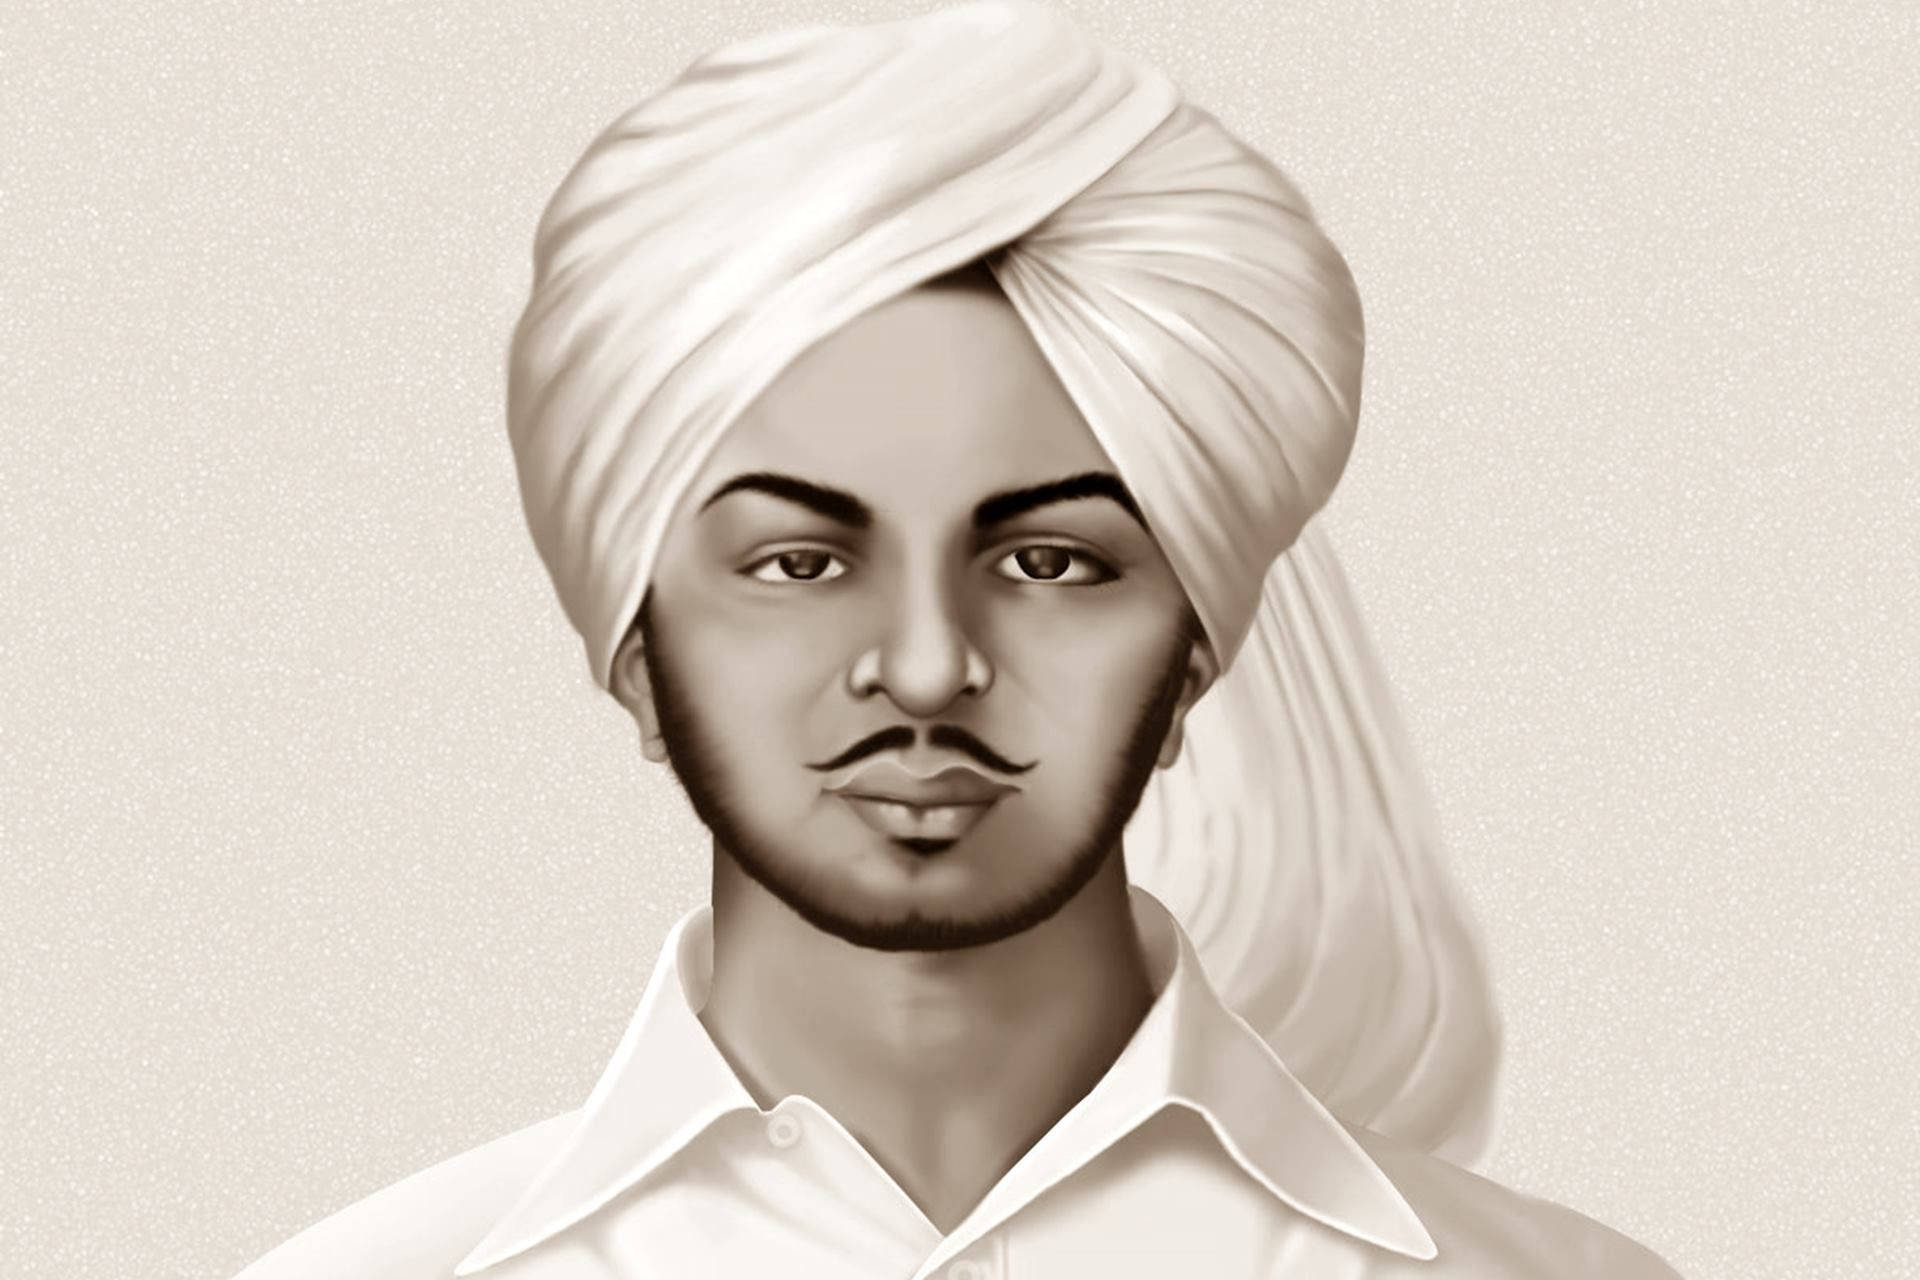 Shaheed Bhagat Singh Dull Poster